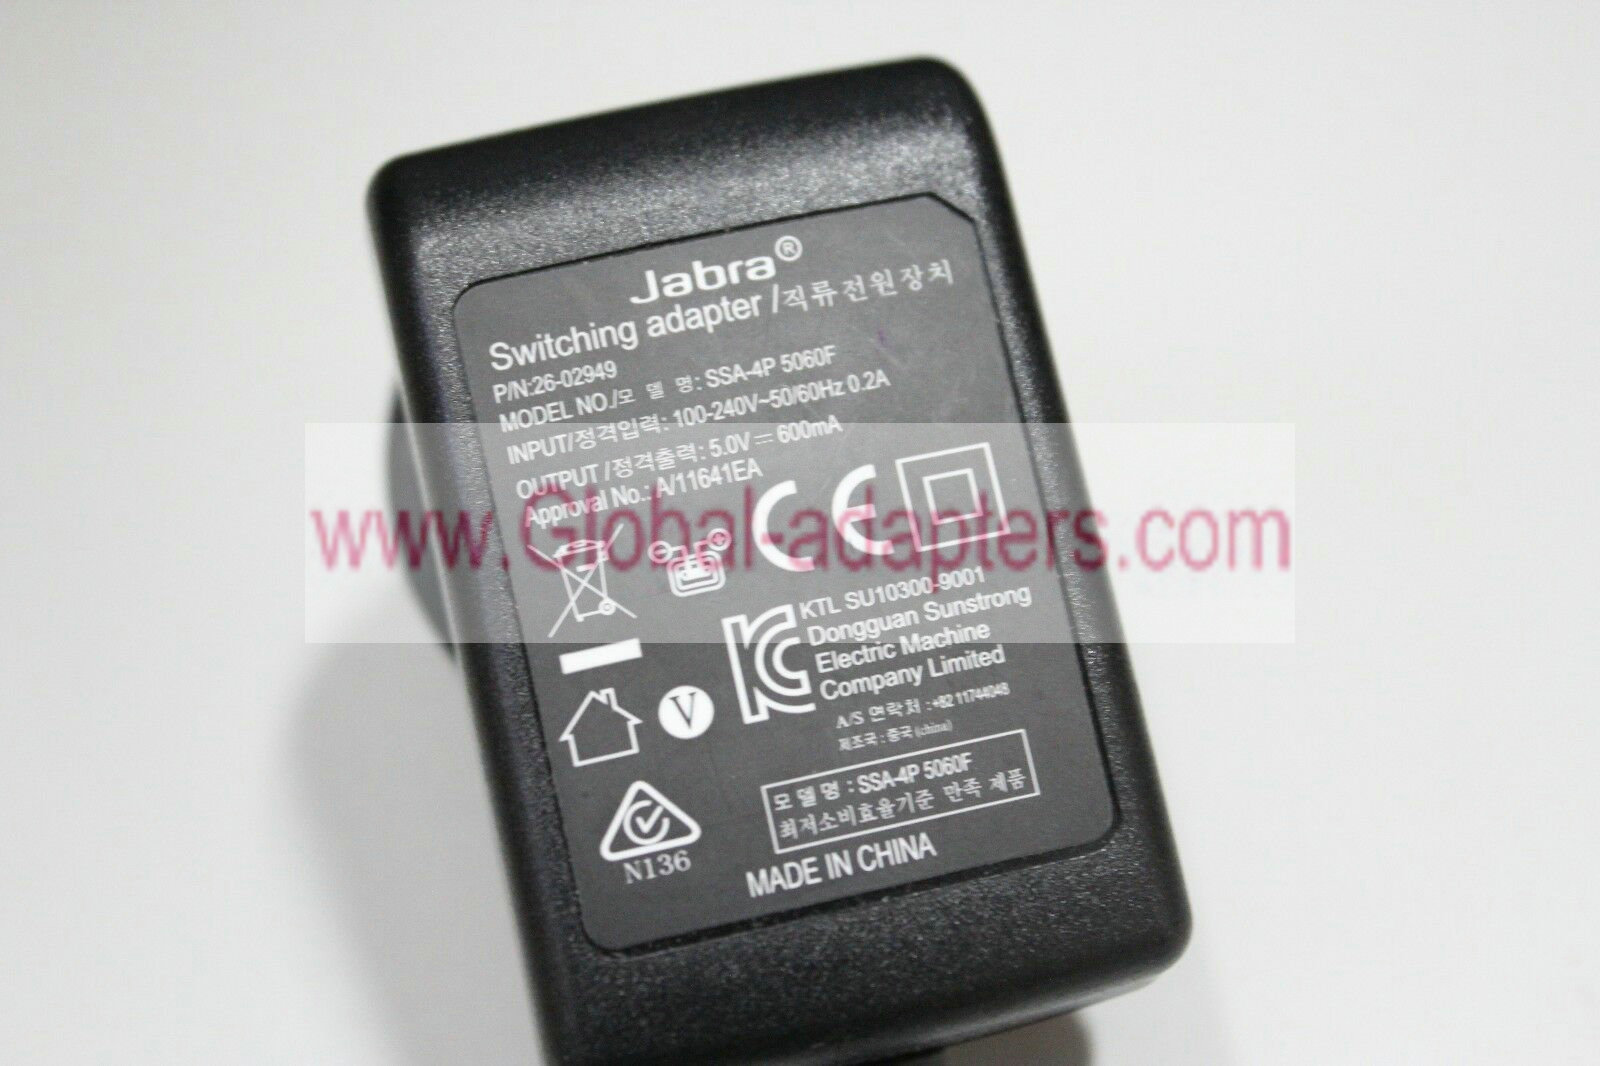 JABRA SSA-4P 5060F SWITCHING ADAPTER 5V 0.6A 26-02949 power charger - Click Image to Close